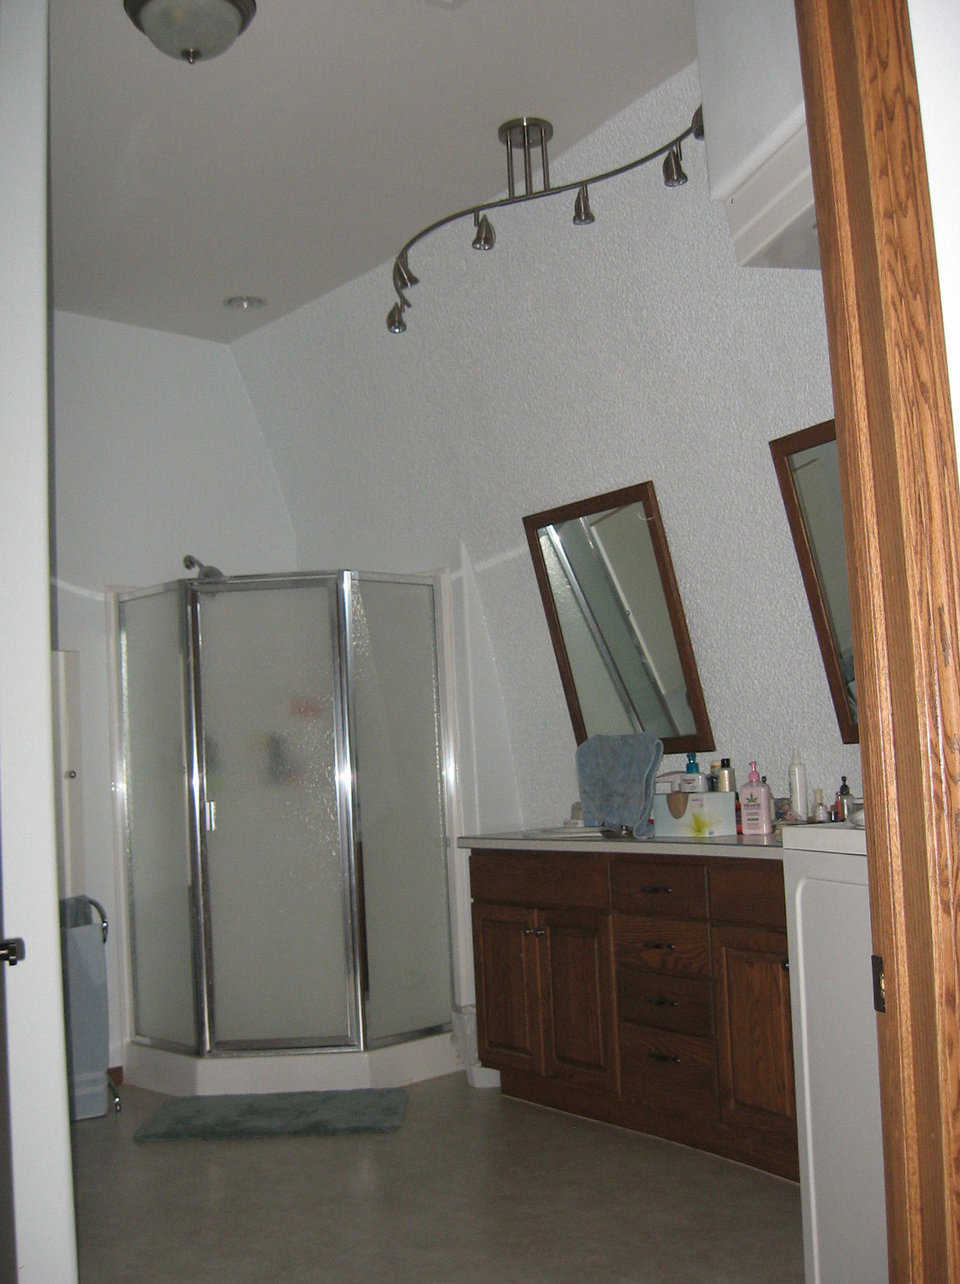 Shower — Besides the walk-in tub, the master bath has a roomy shower.